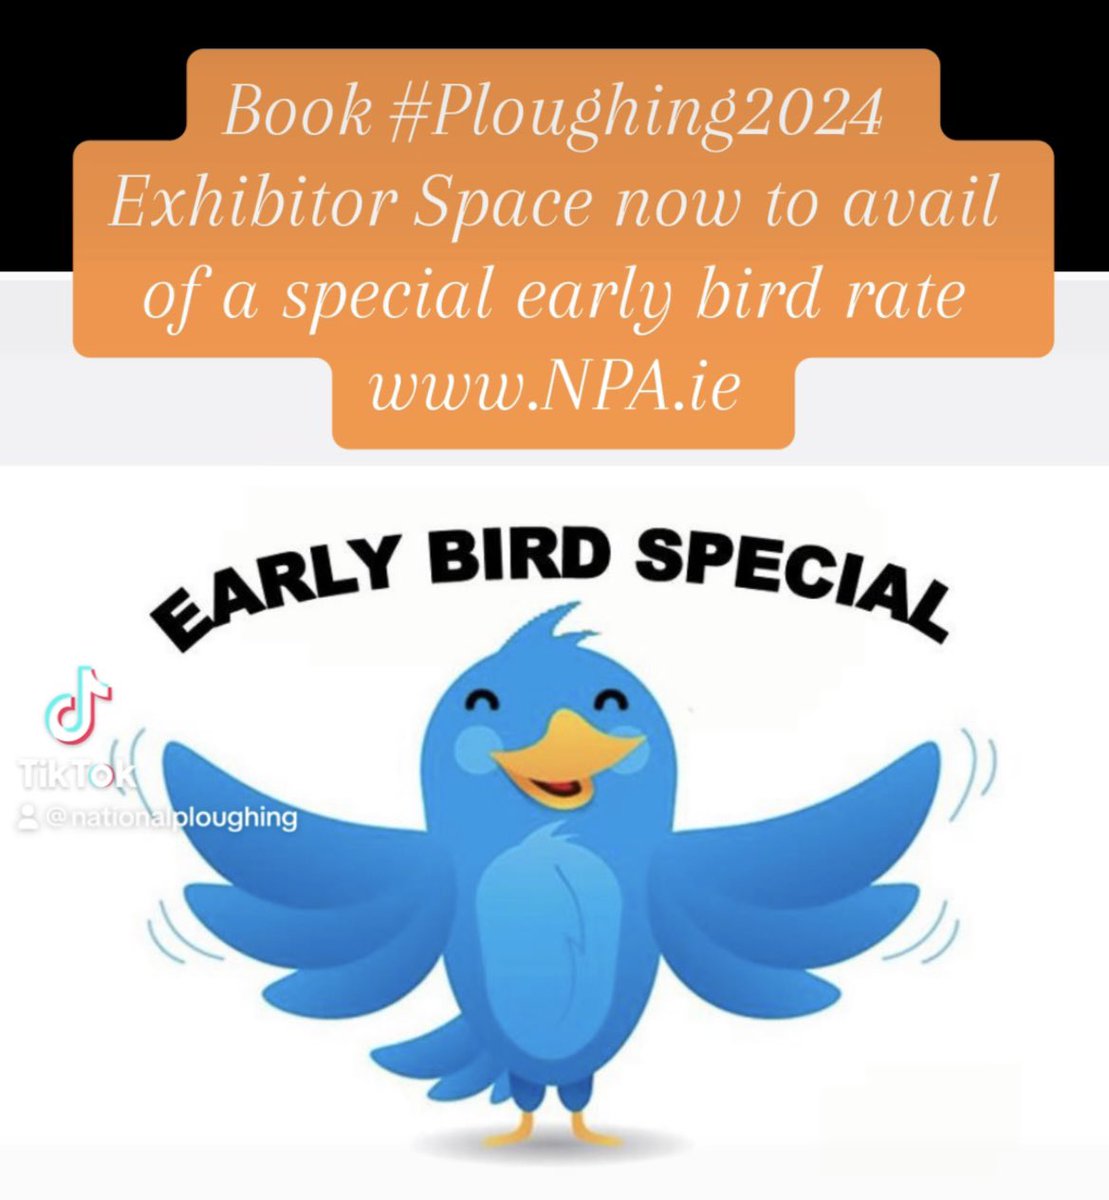 #Ploughing2024 will take place in Ratheniska, Co Laois on September 17th, 18th & 19th….pls see NPA.ie to book exhibition space